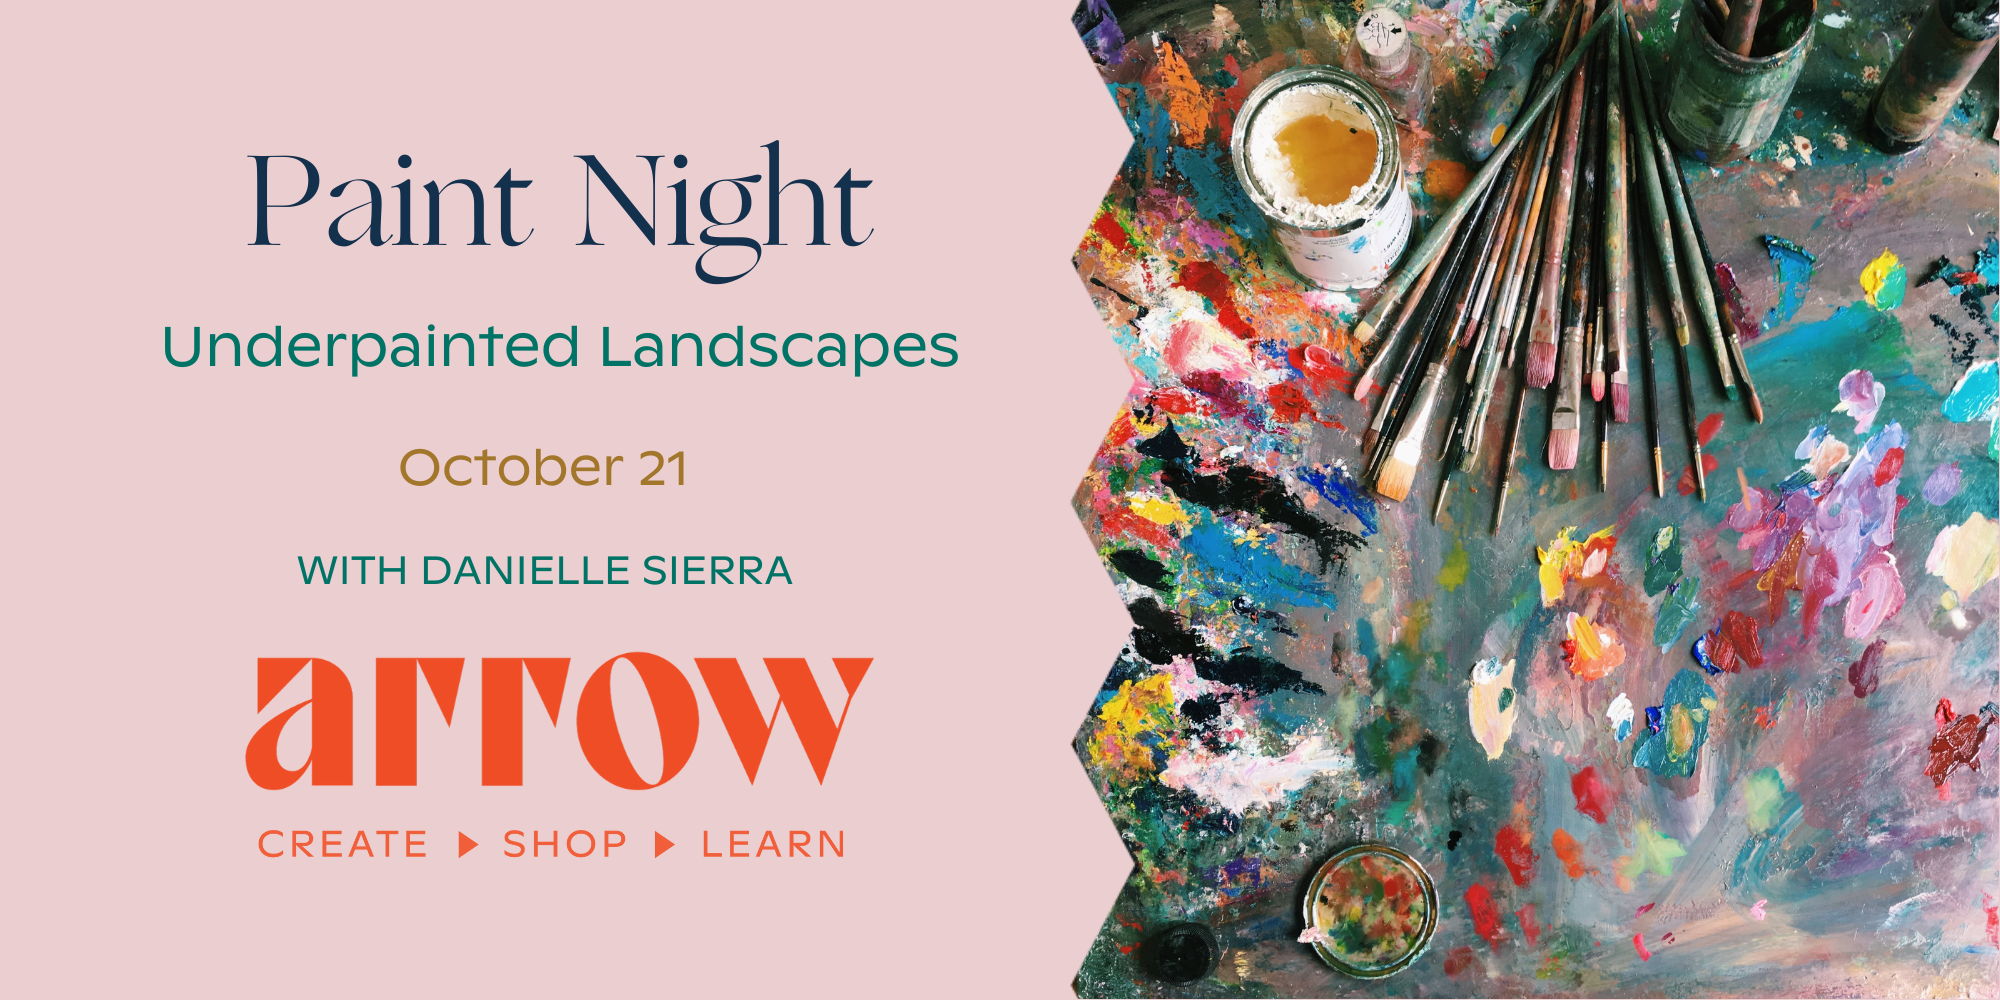 Paint Night: Underpainted Landscapes with Danielle Sierra promotional image